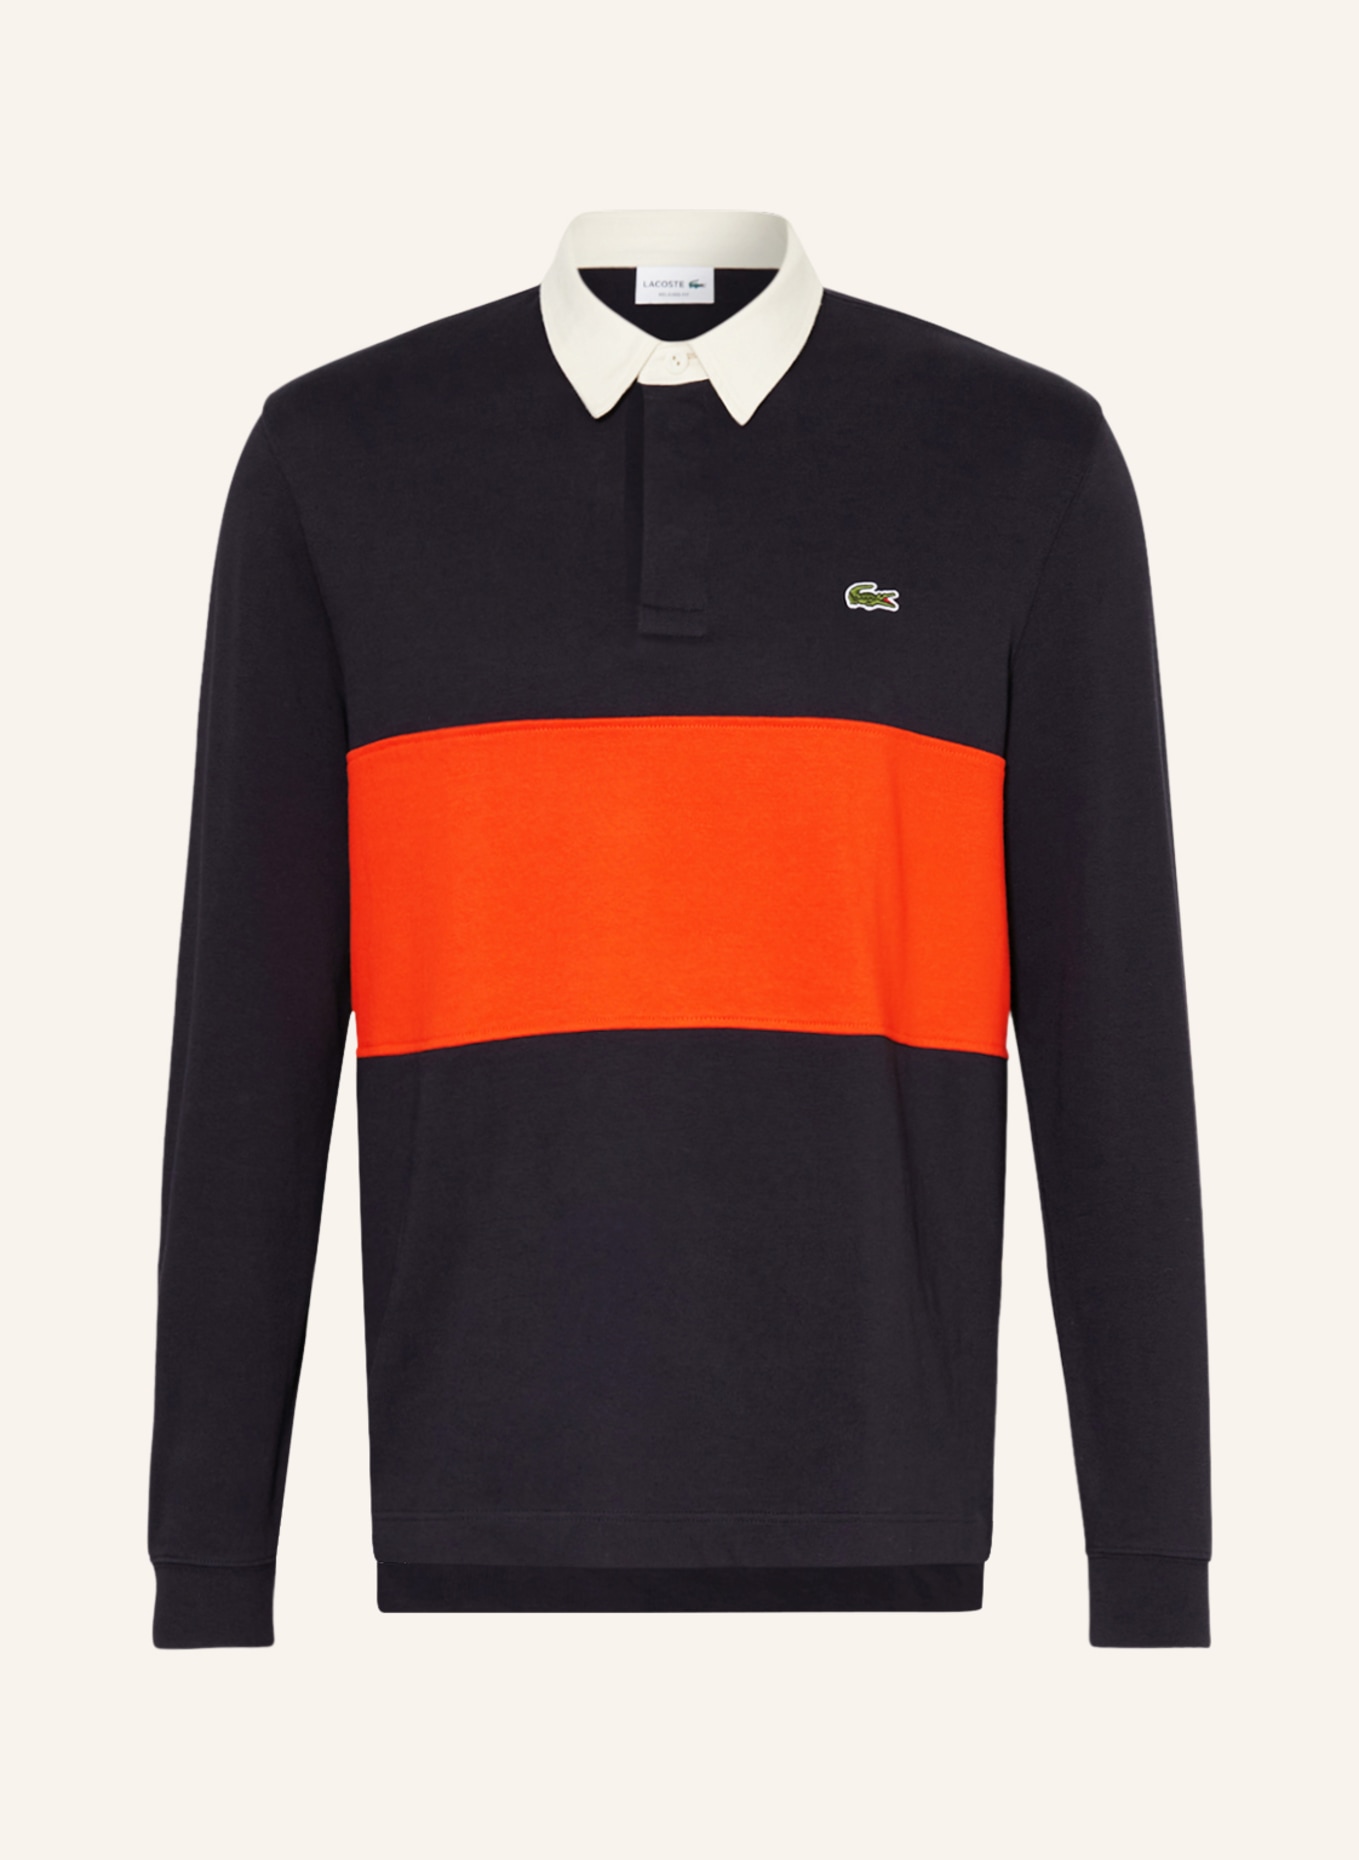 LACOSTE Jersey-Poloshirt Relaxed Fit, Farbe: DUNKELBLAU/ ROT (Bild 1)